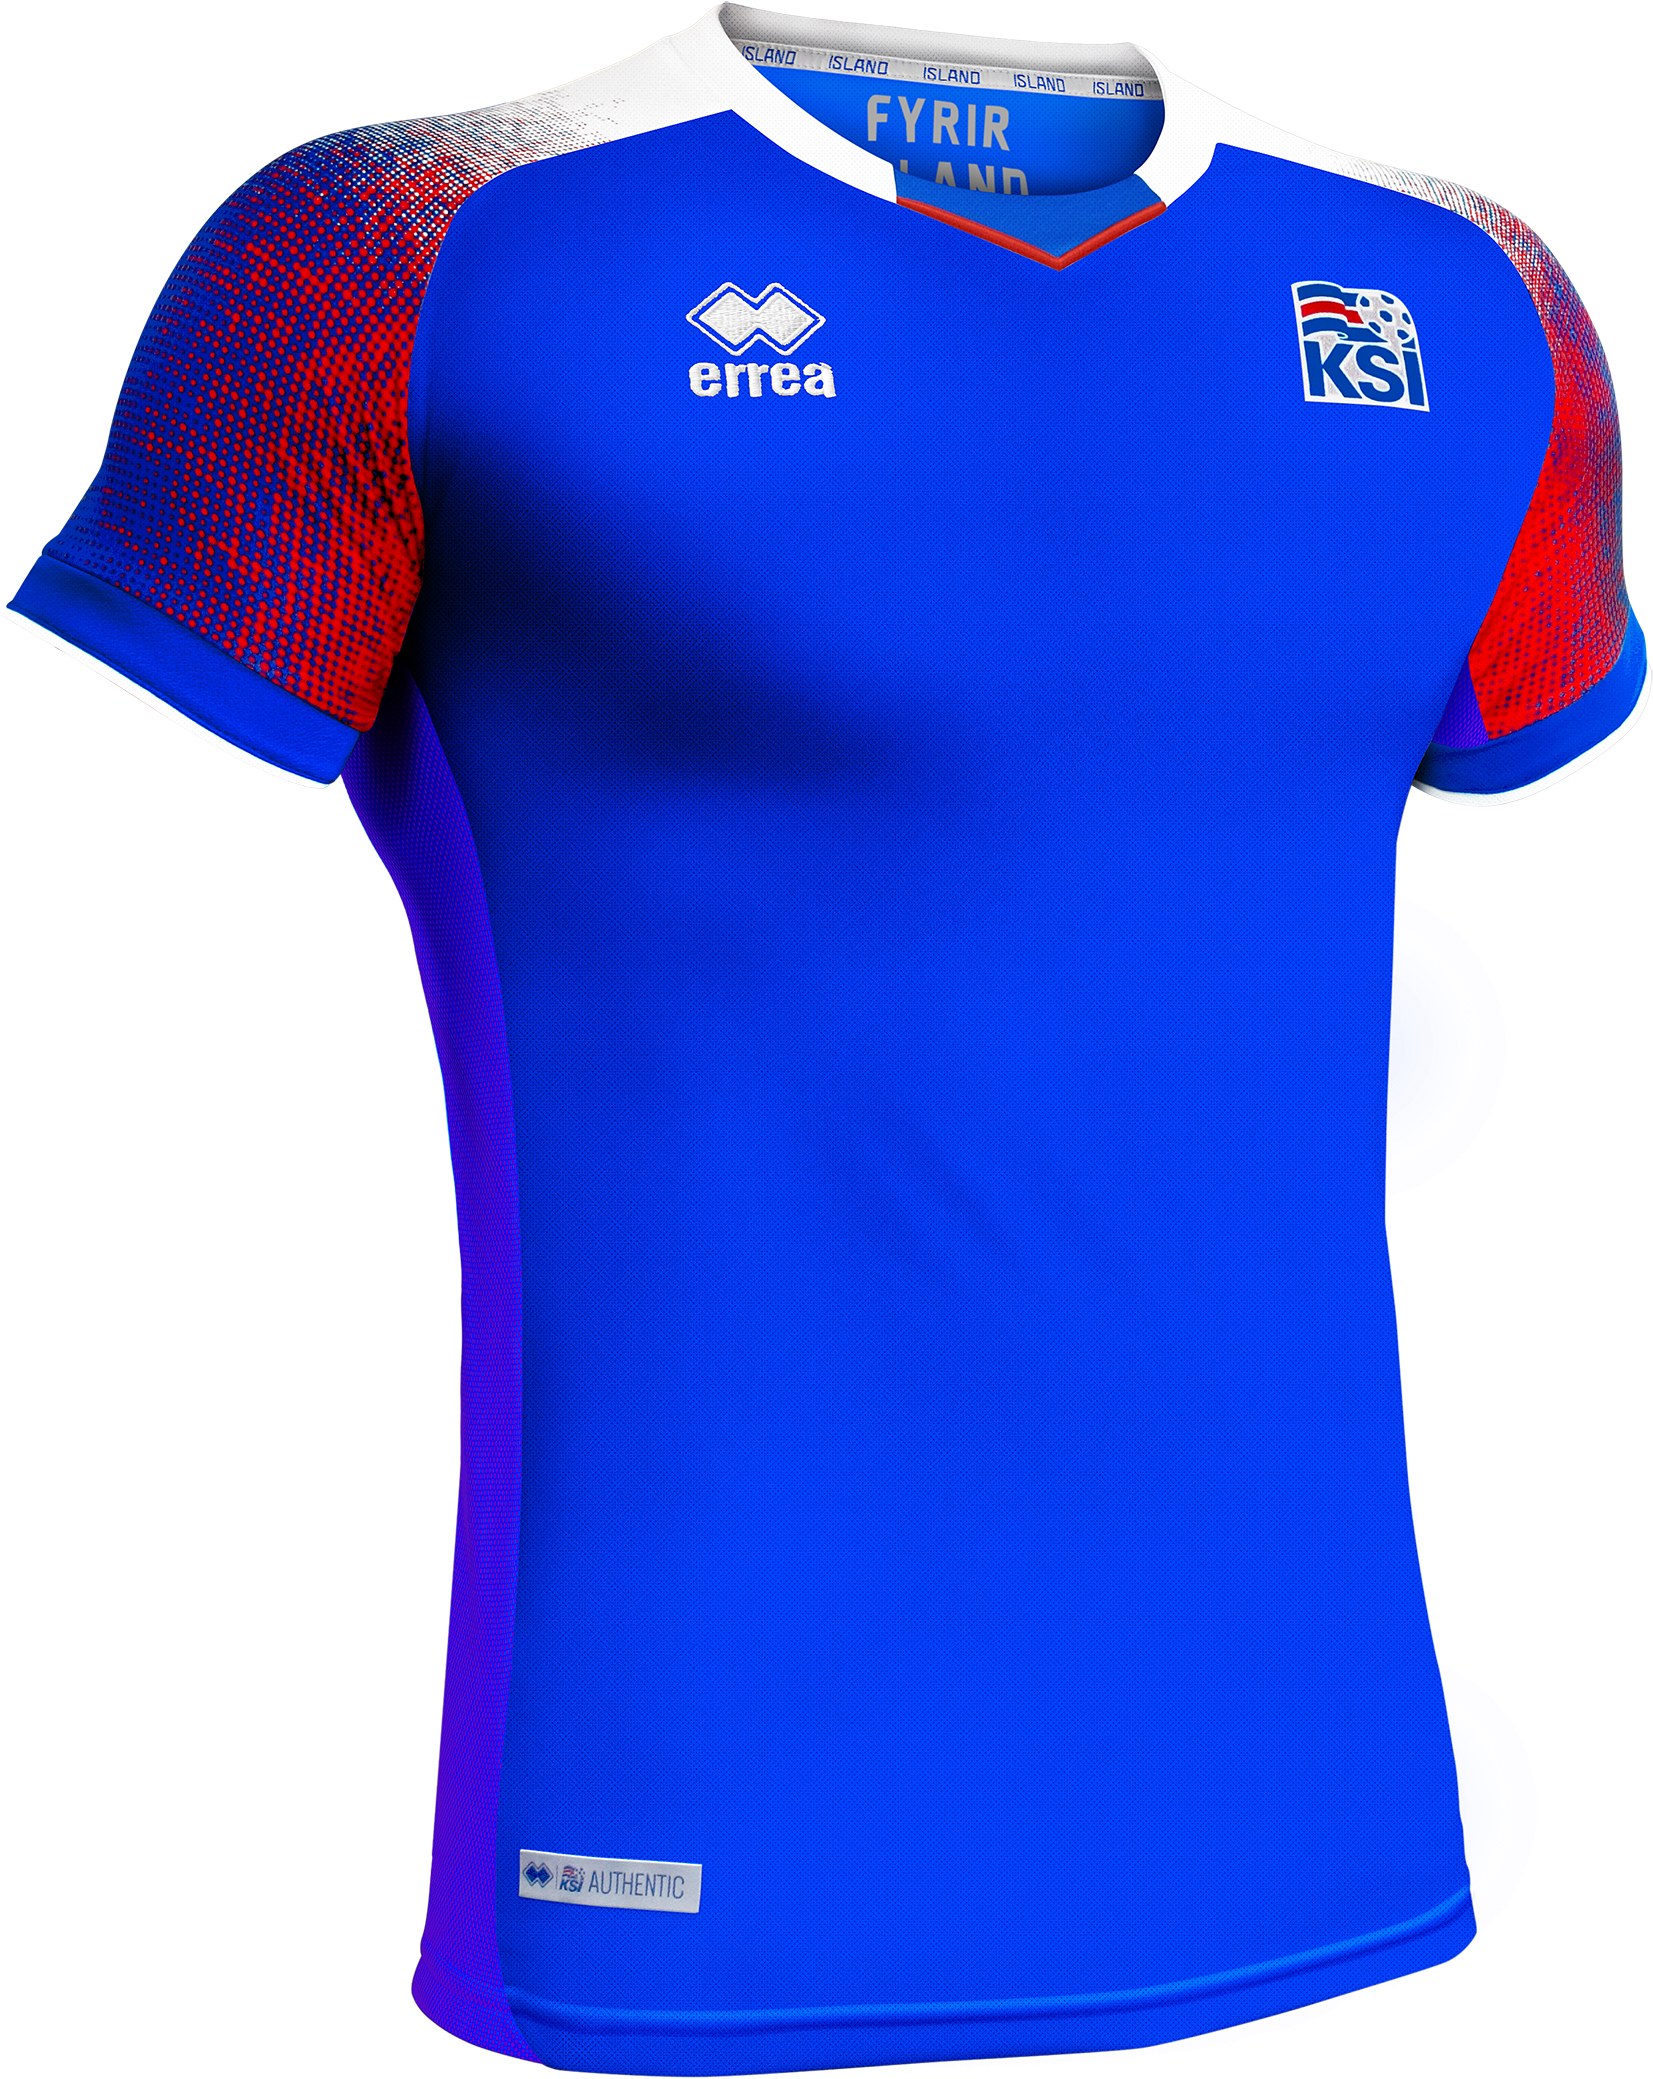 Iceland World Cup 2018 Official Home Jersey - Iceland World Cup Kit 2018 (1871x2362)